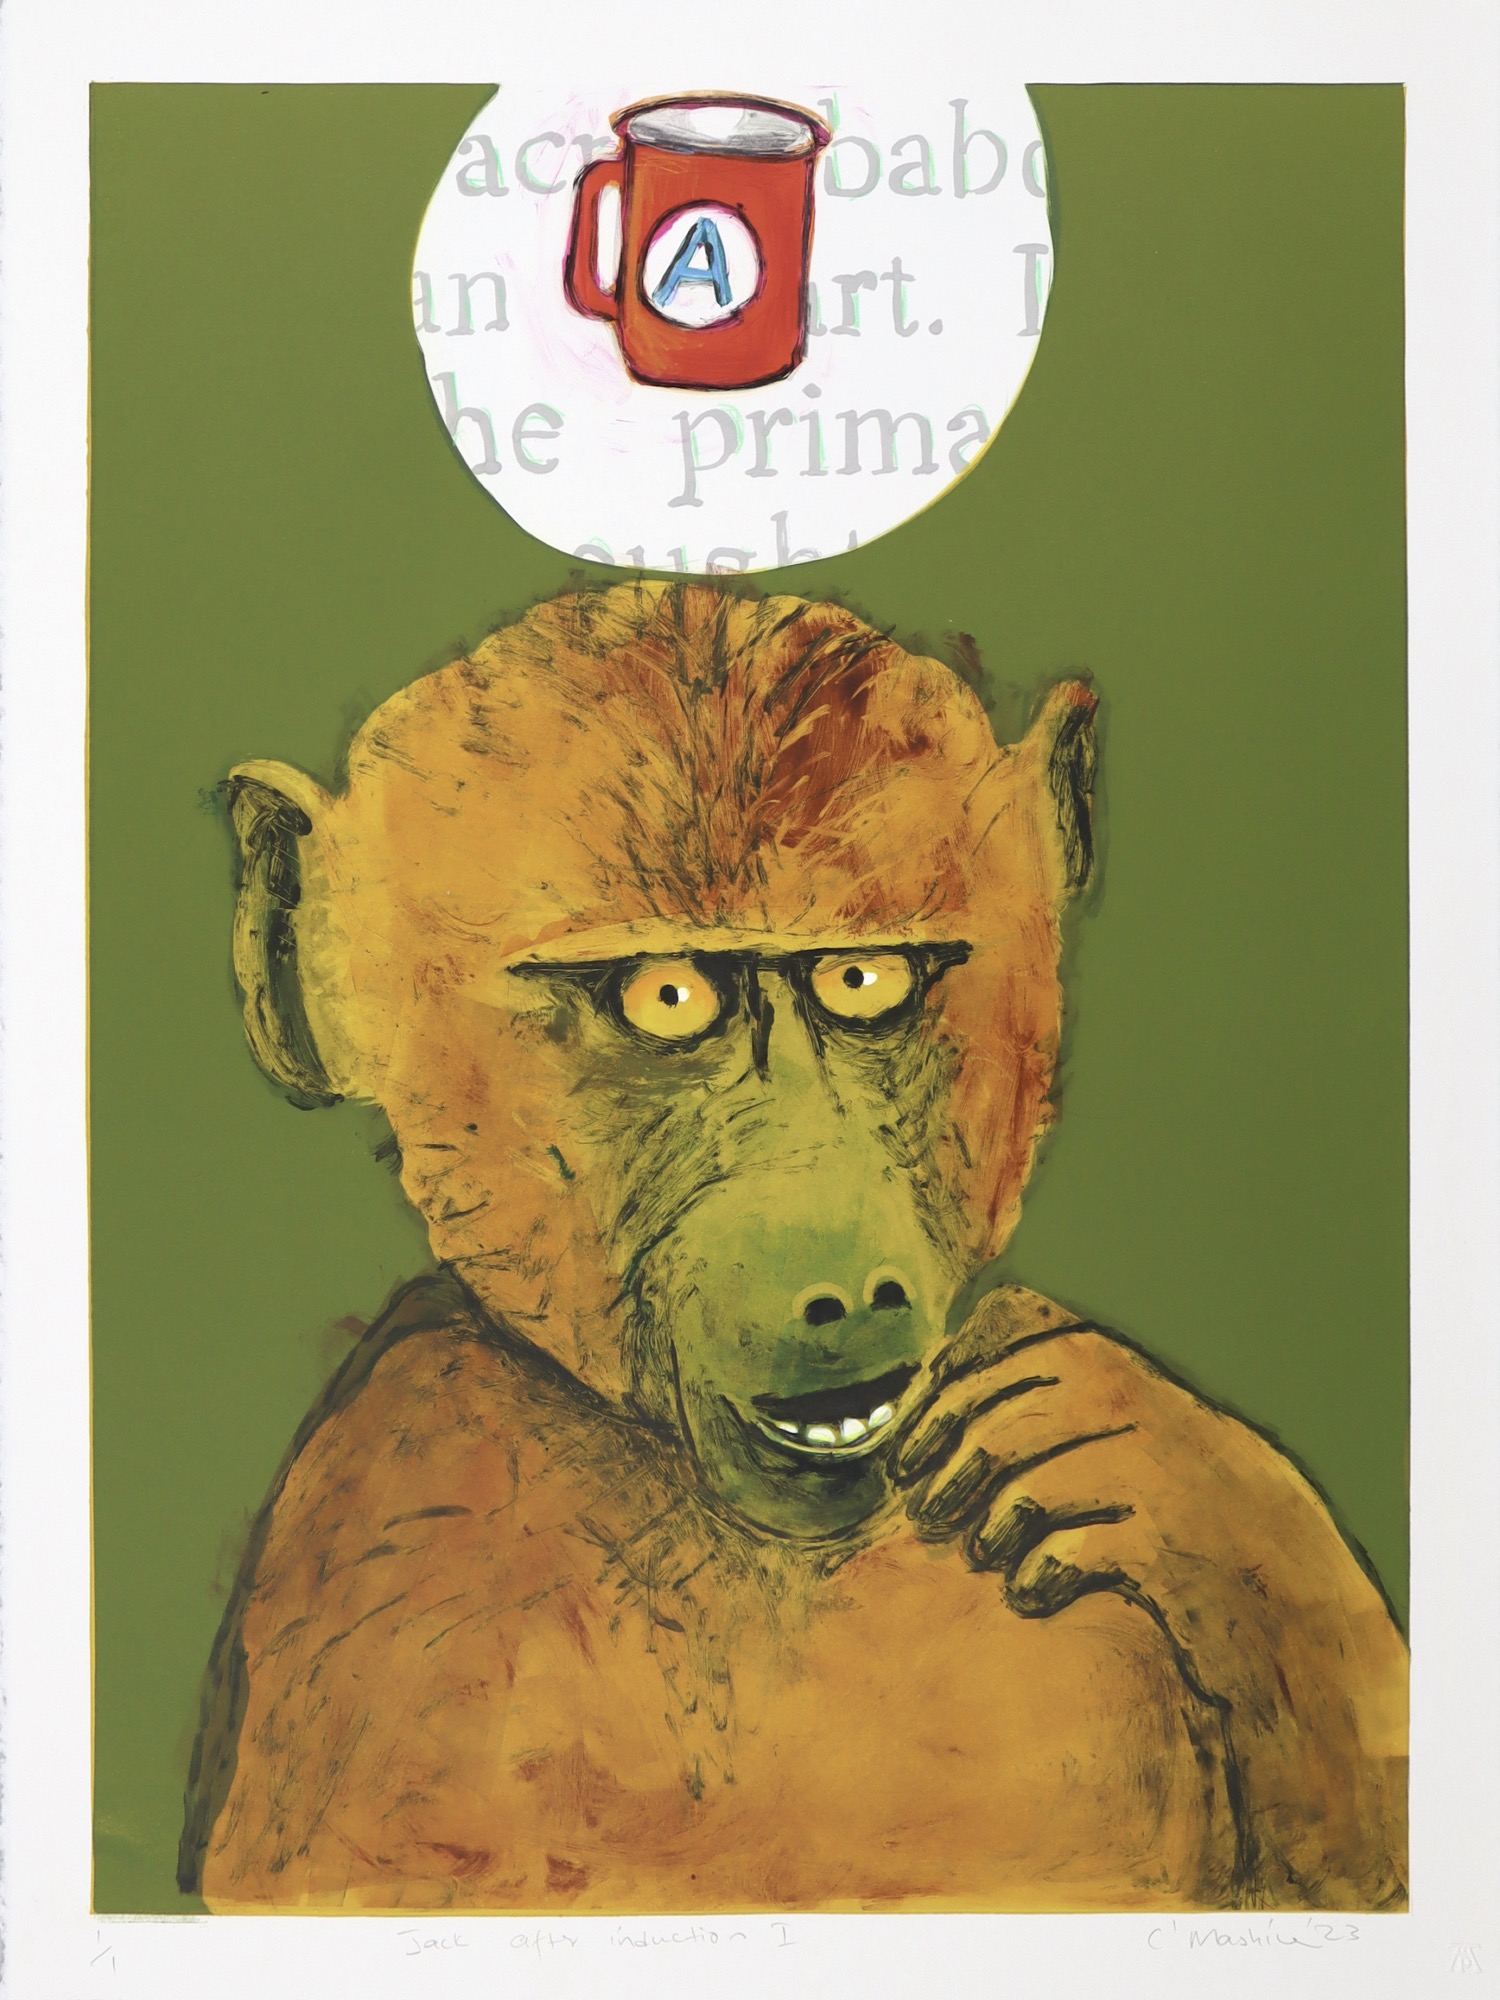 monotype in soft green and browns of young baboon